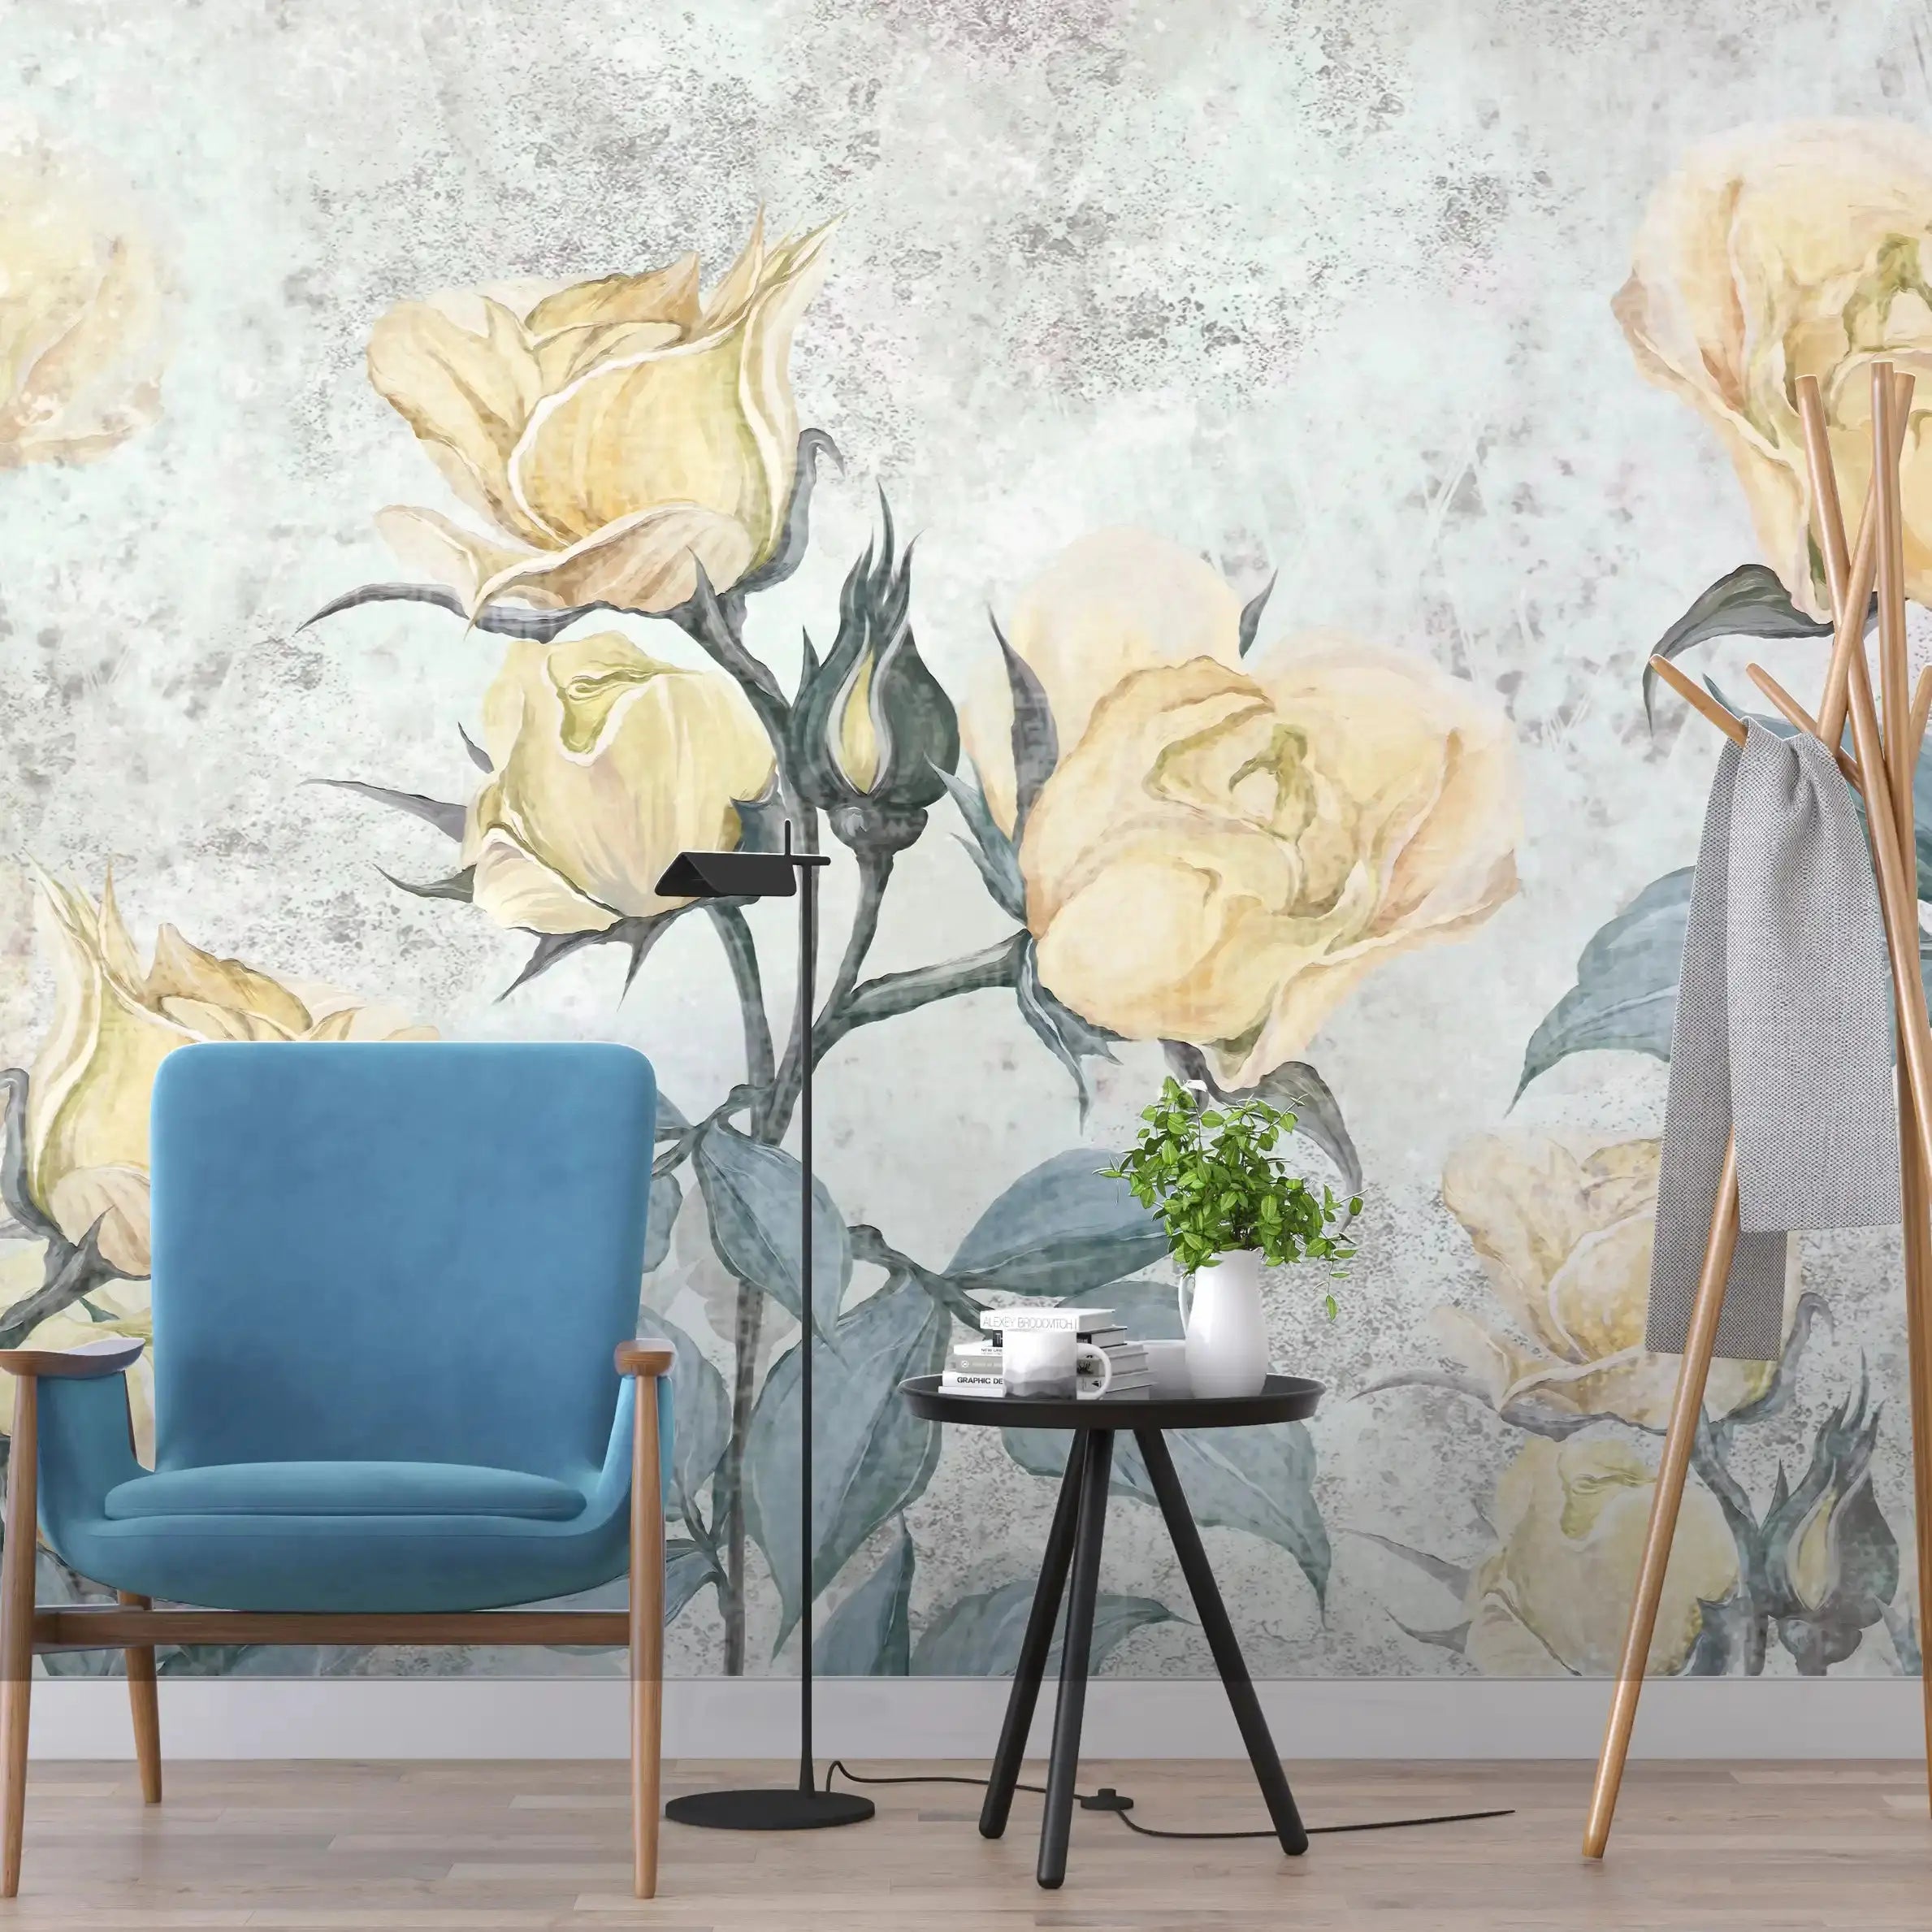 3002-C / Floral Peel and Stick Wallpaper - Yellow Roses Mural, Vintage Mural for Wall Decor, Ideal for Bedroom and Bathroom - Artevella